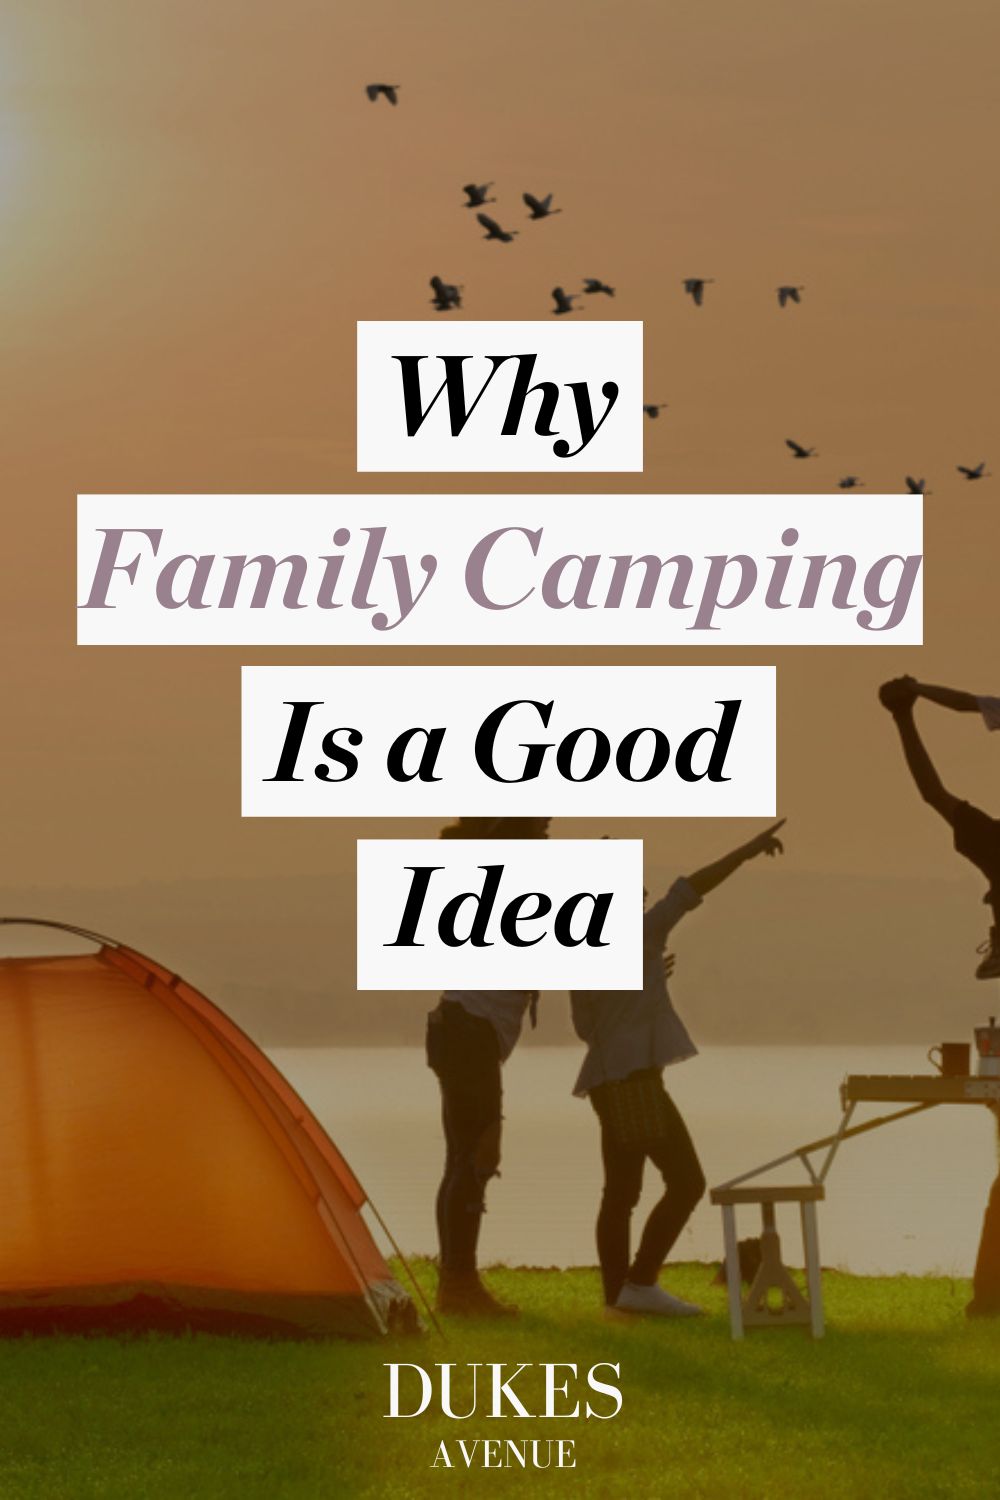 Family camping by the sea with text overlay 'Why Family Camping is a Good Idea'